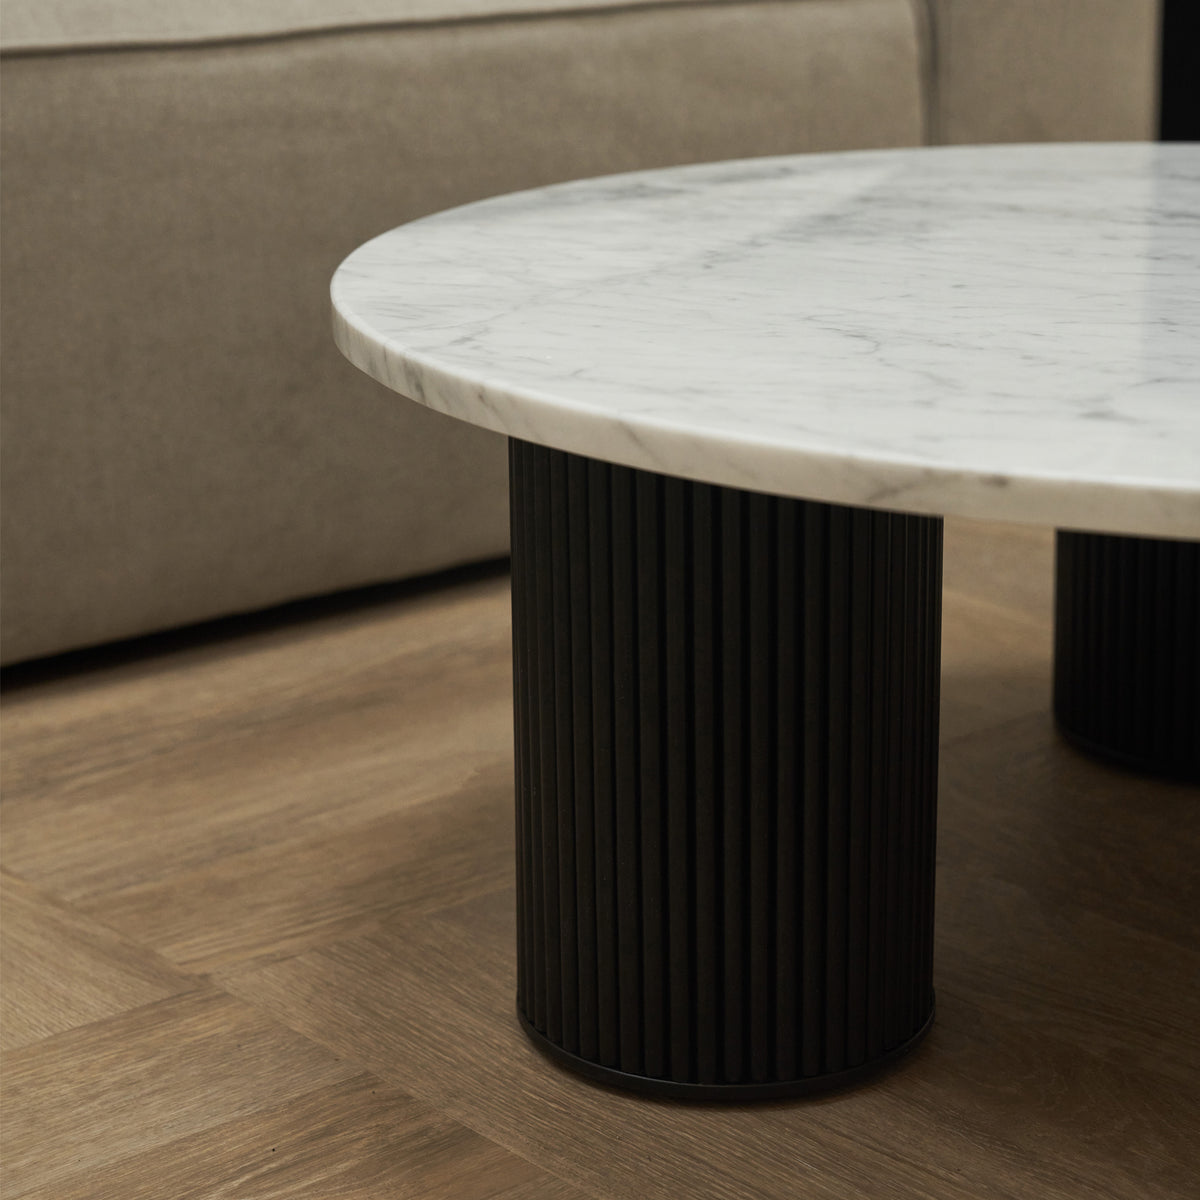 Detail shot of Marble Round Large Coffee Table real marble surface\